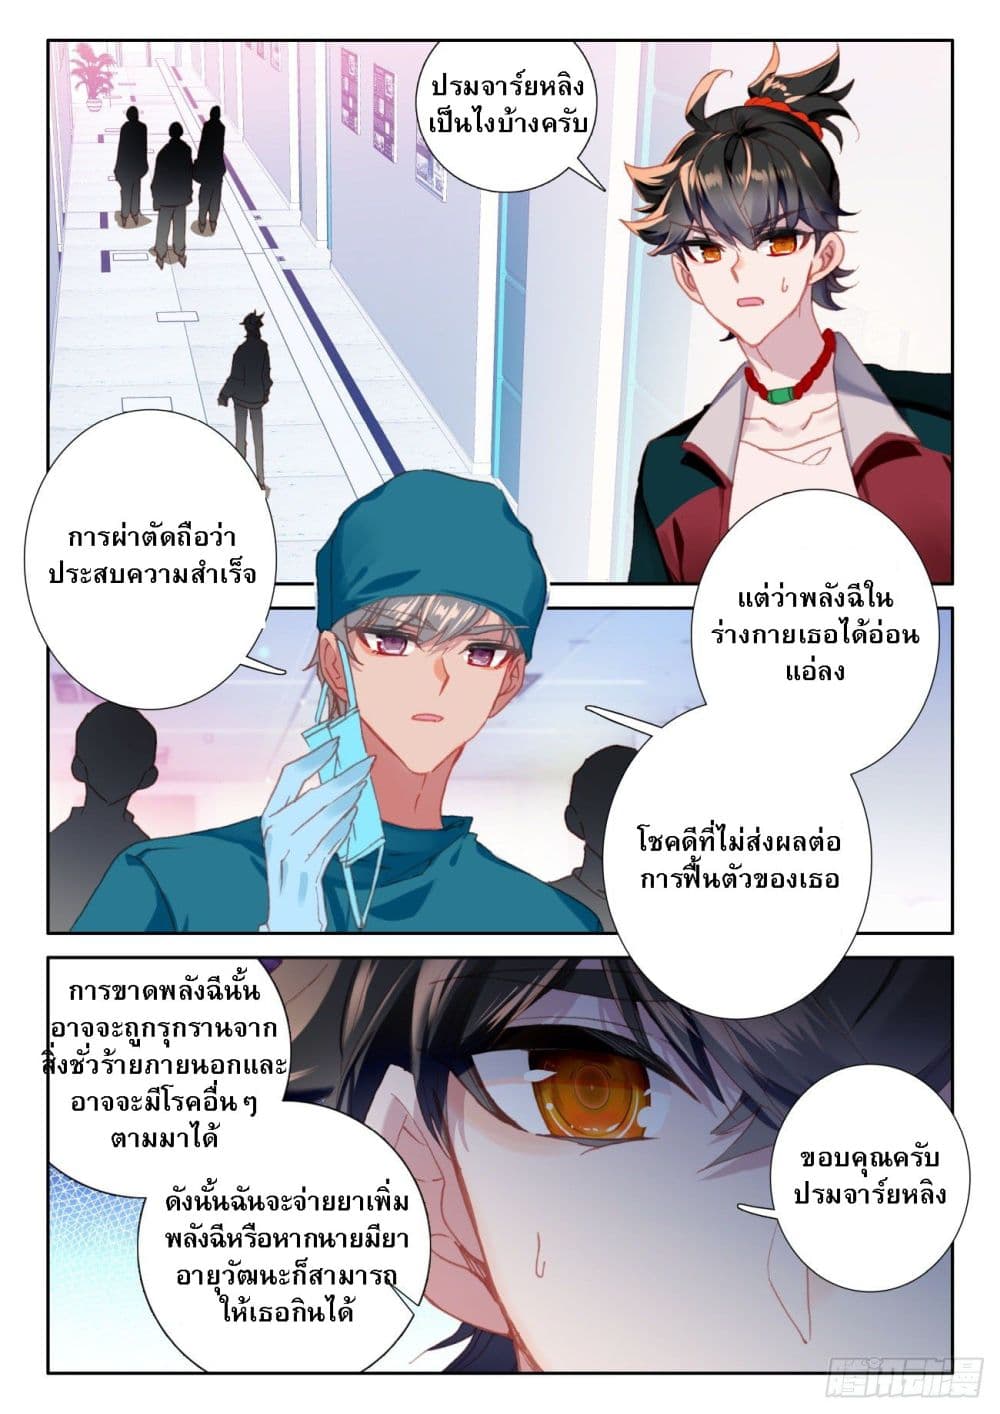 Becoming Immortal by Paying Cash ตอนที่ 8 (10)